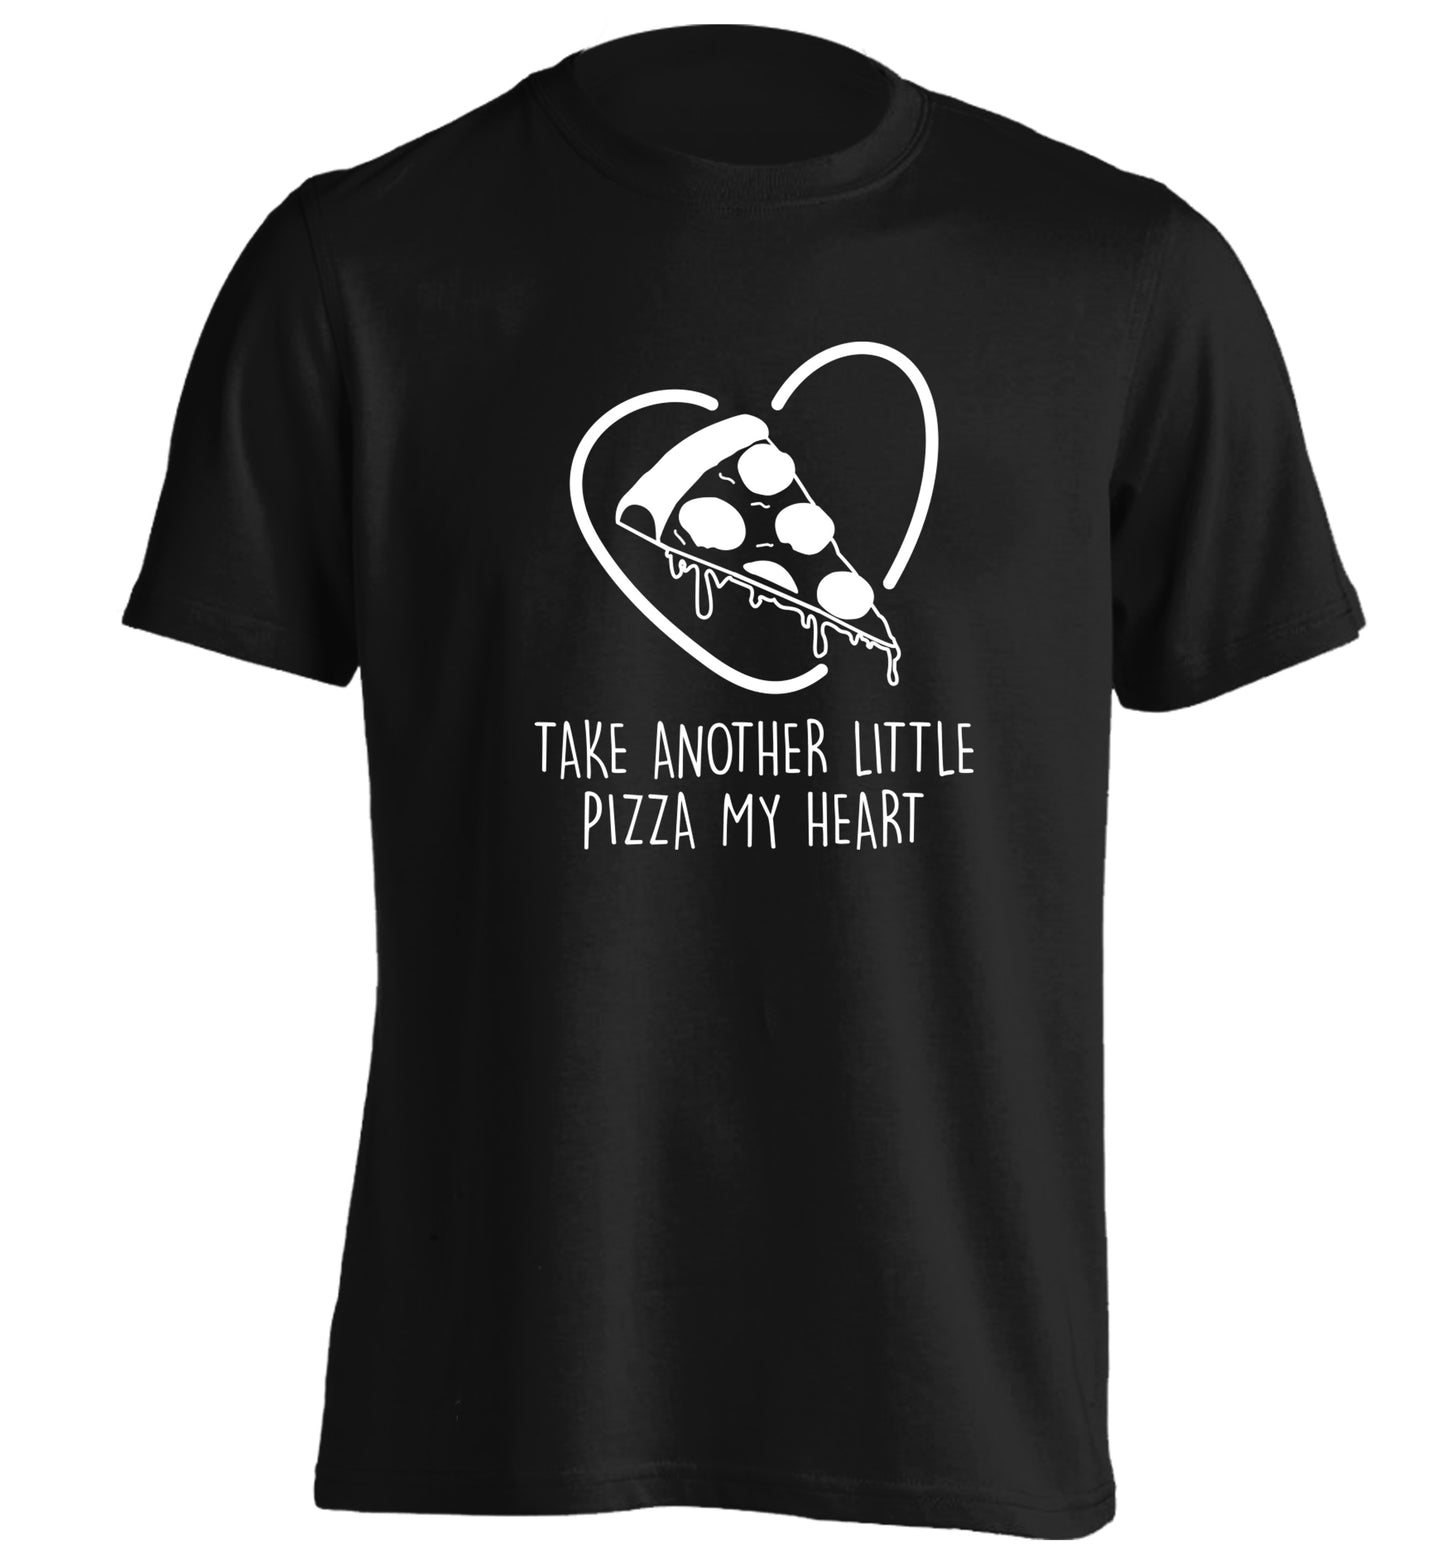 Take another little pizza my heart adults unisex black Tshirt 2XL